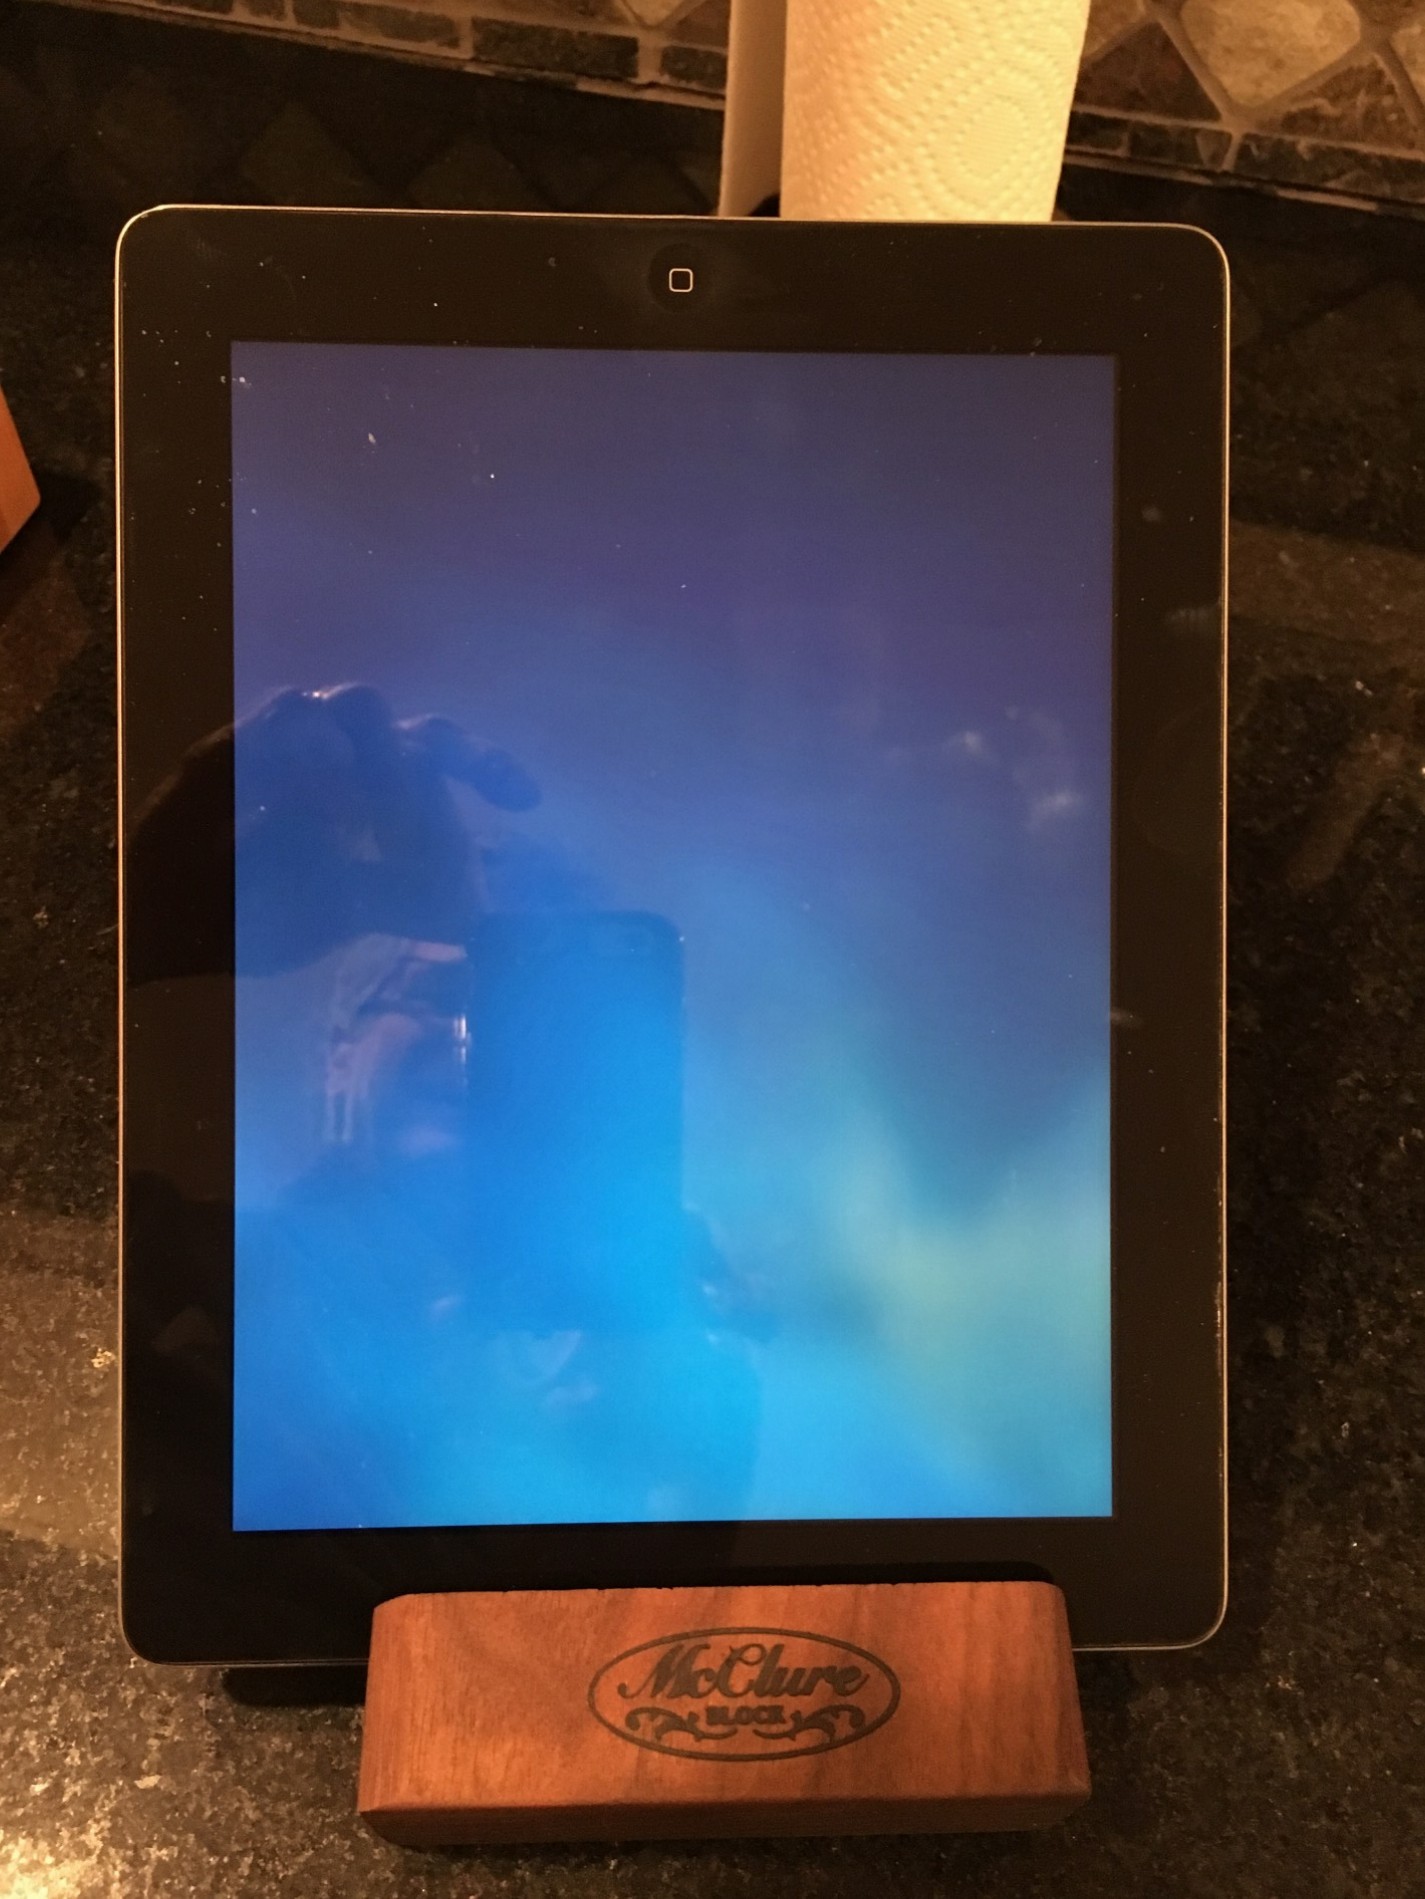 blog.mcclureblock_image-e1452523359991 McClure Block New IPAD Tablet Stand In Time For Consumer Electronics Show